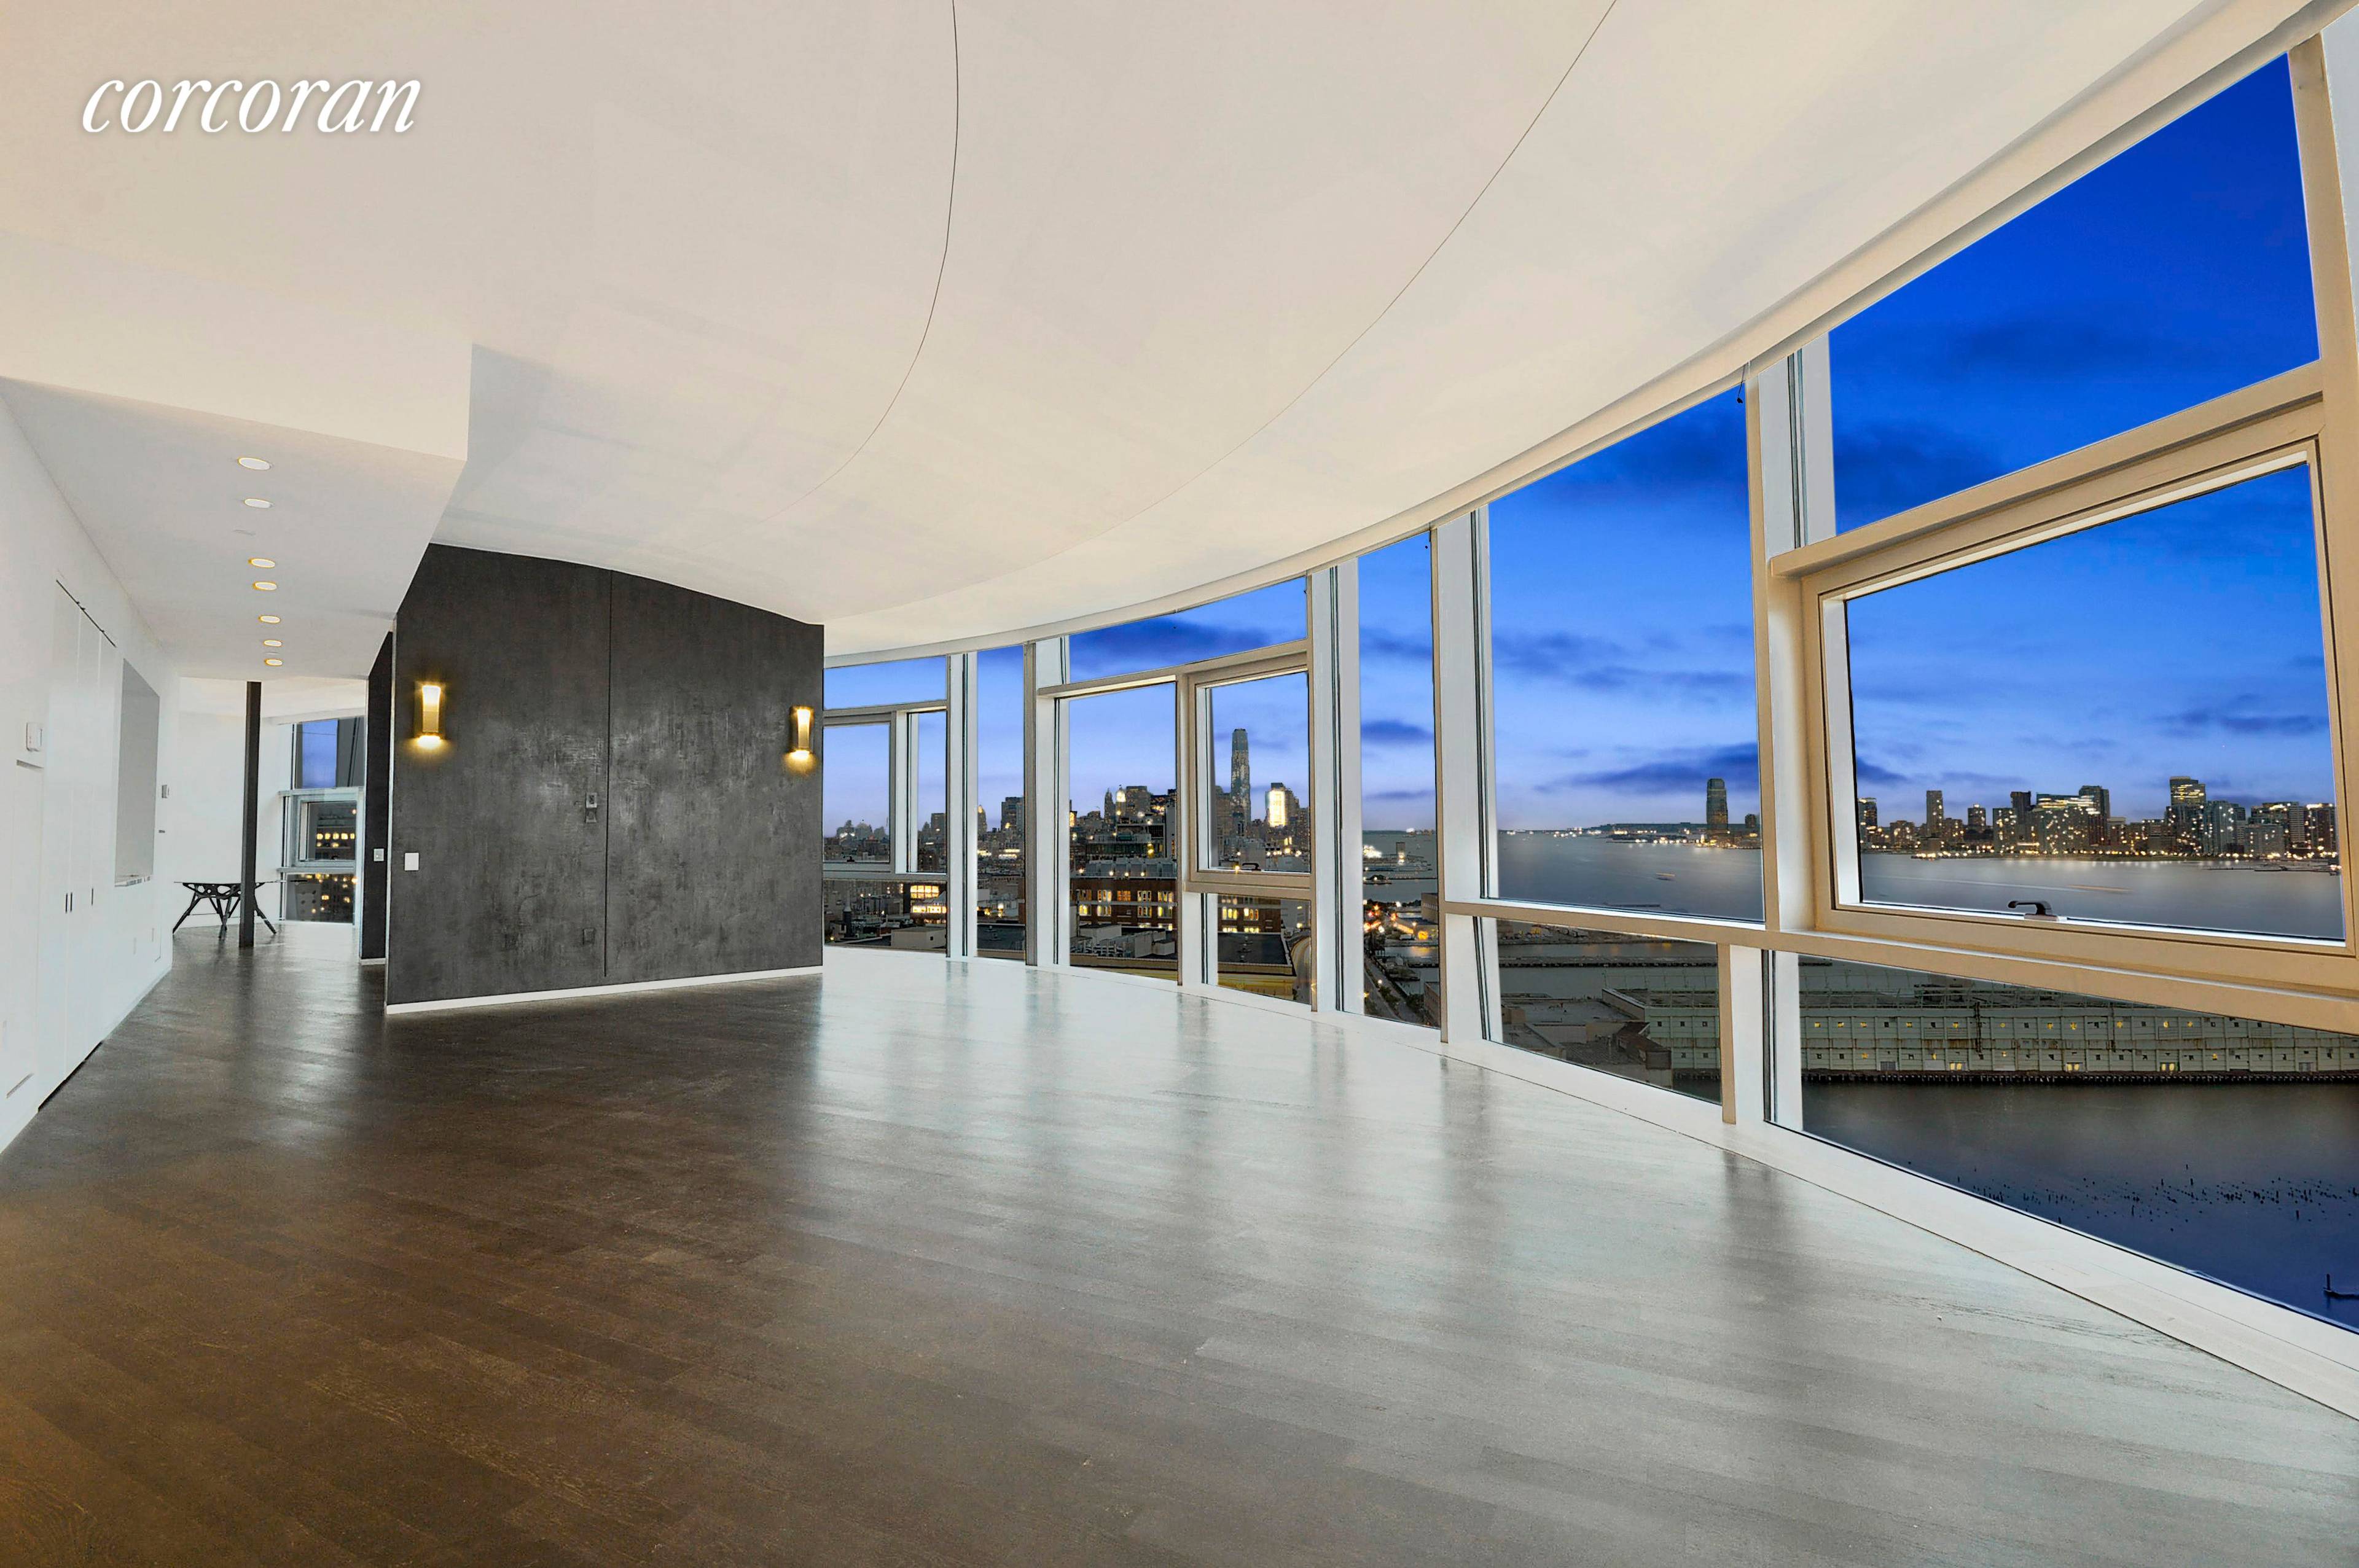 Spanning 4818sqft, this full floor Penthouse with 2 outdoor spaces at 100 Eleventh Avenue with freshly renovated interiors by Architectural Digest Top 100 designer Jennifer Post, was designed by Pritzker ...